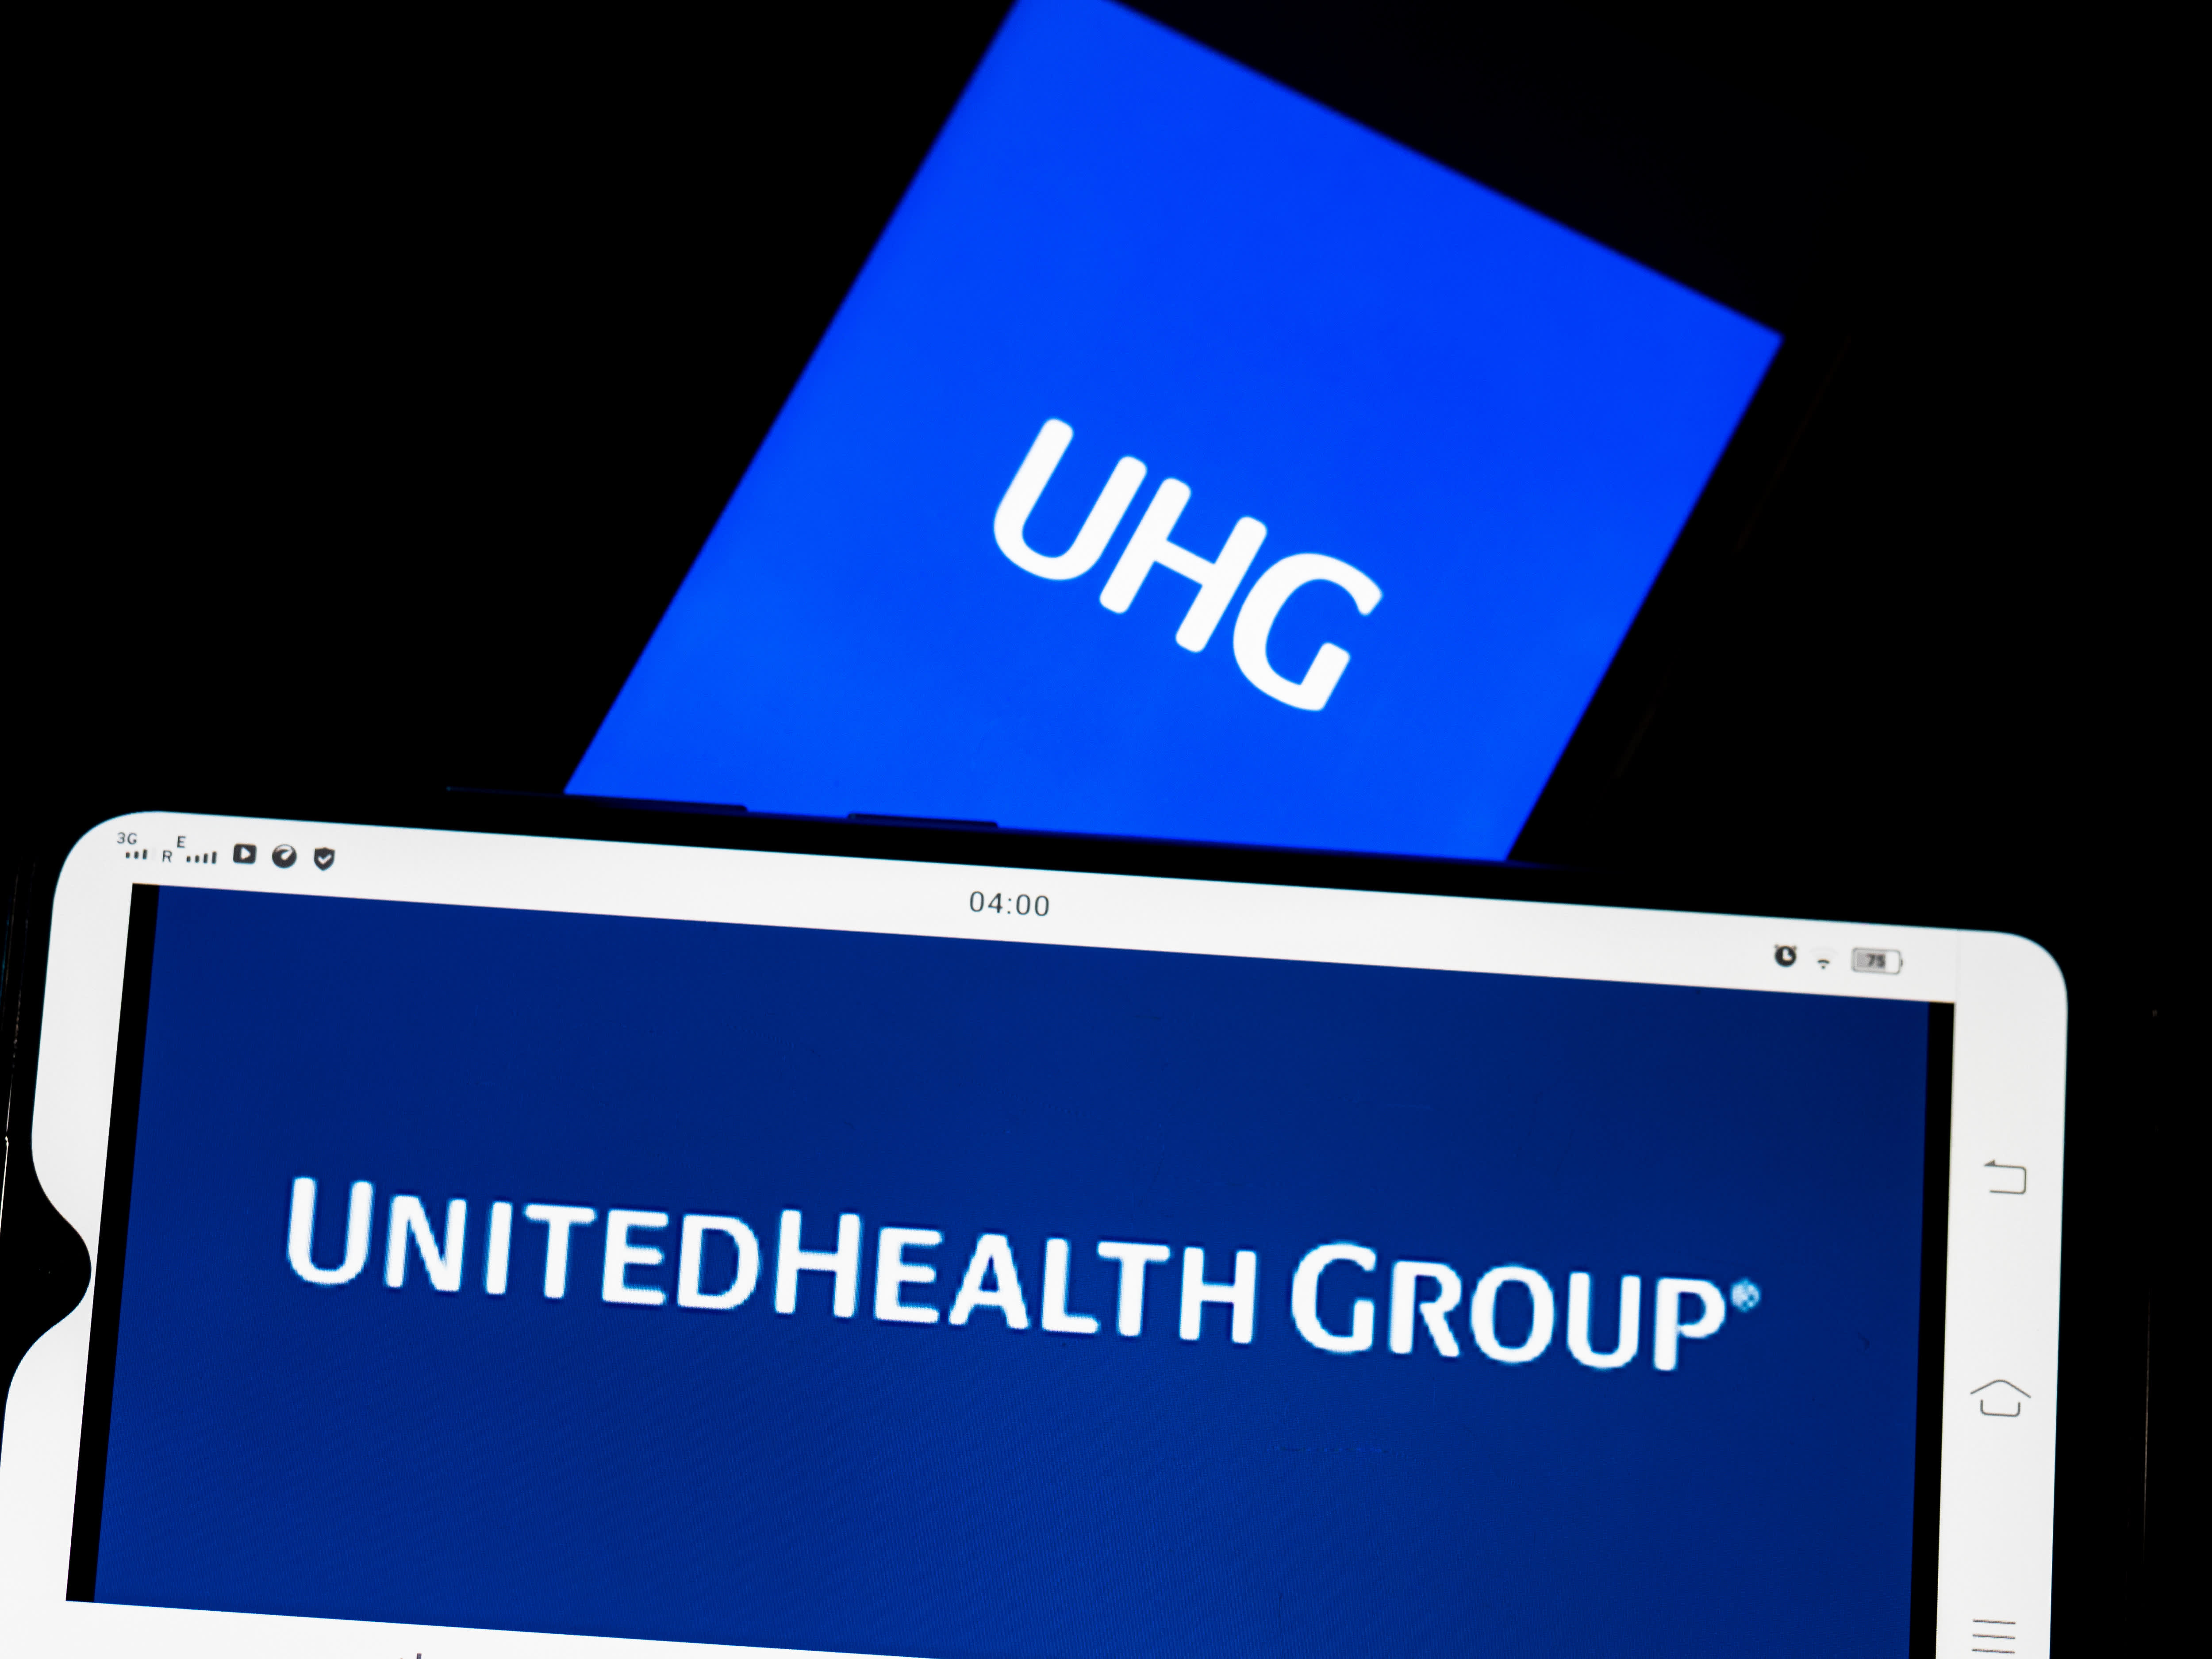 Patient data compromised, UnitedHealth paid ransom to cyber criminals